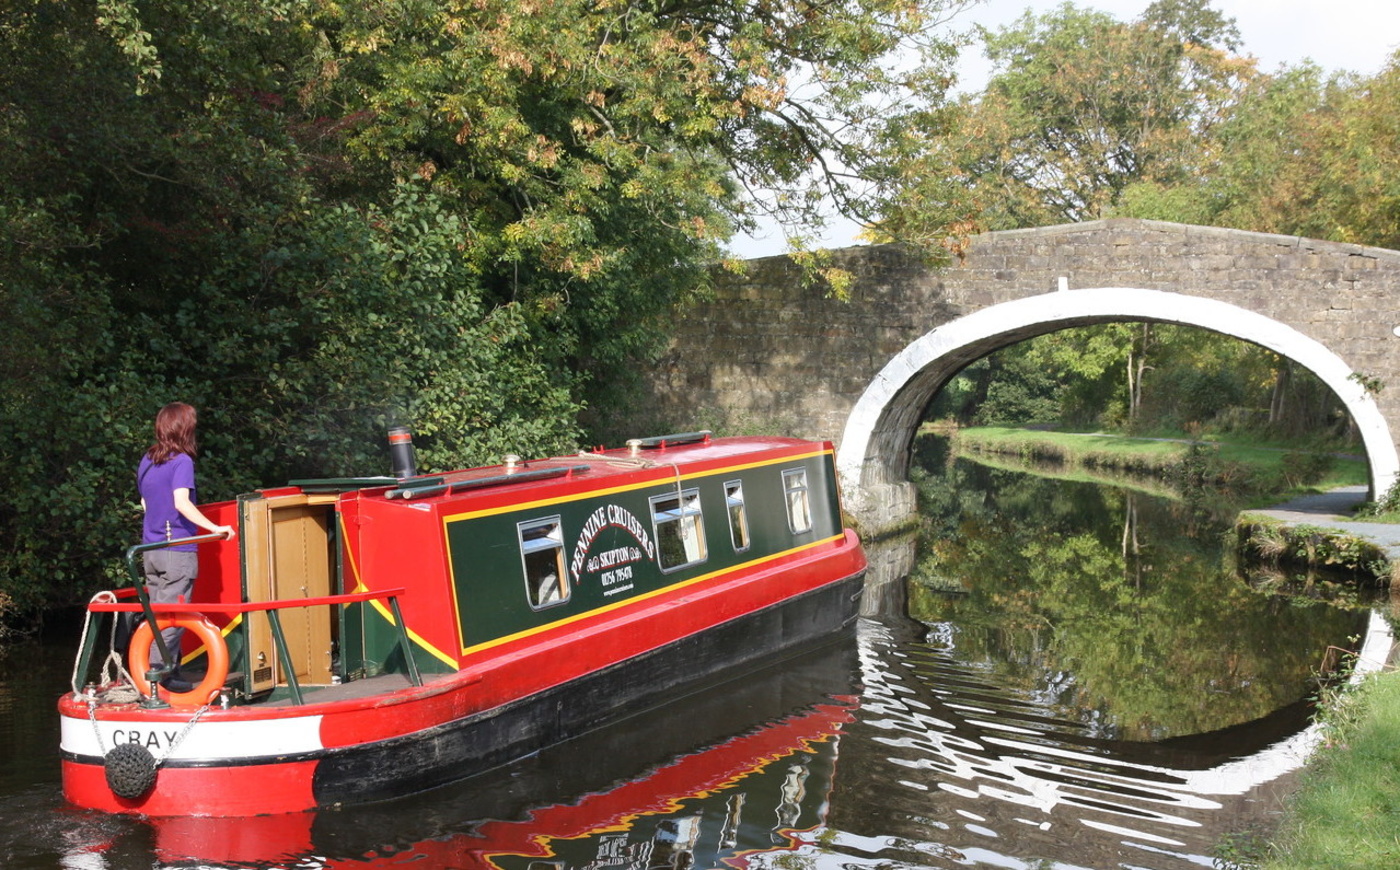 Narrowboat about to go under a bridge